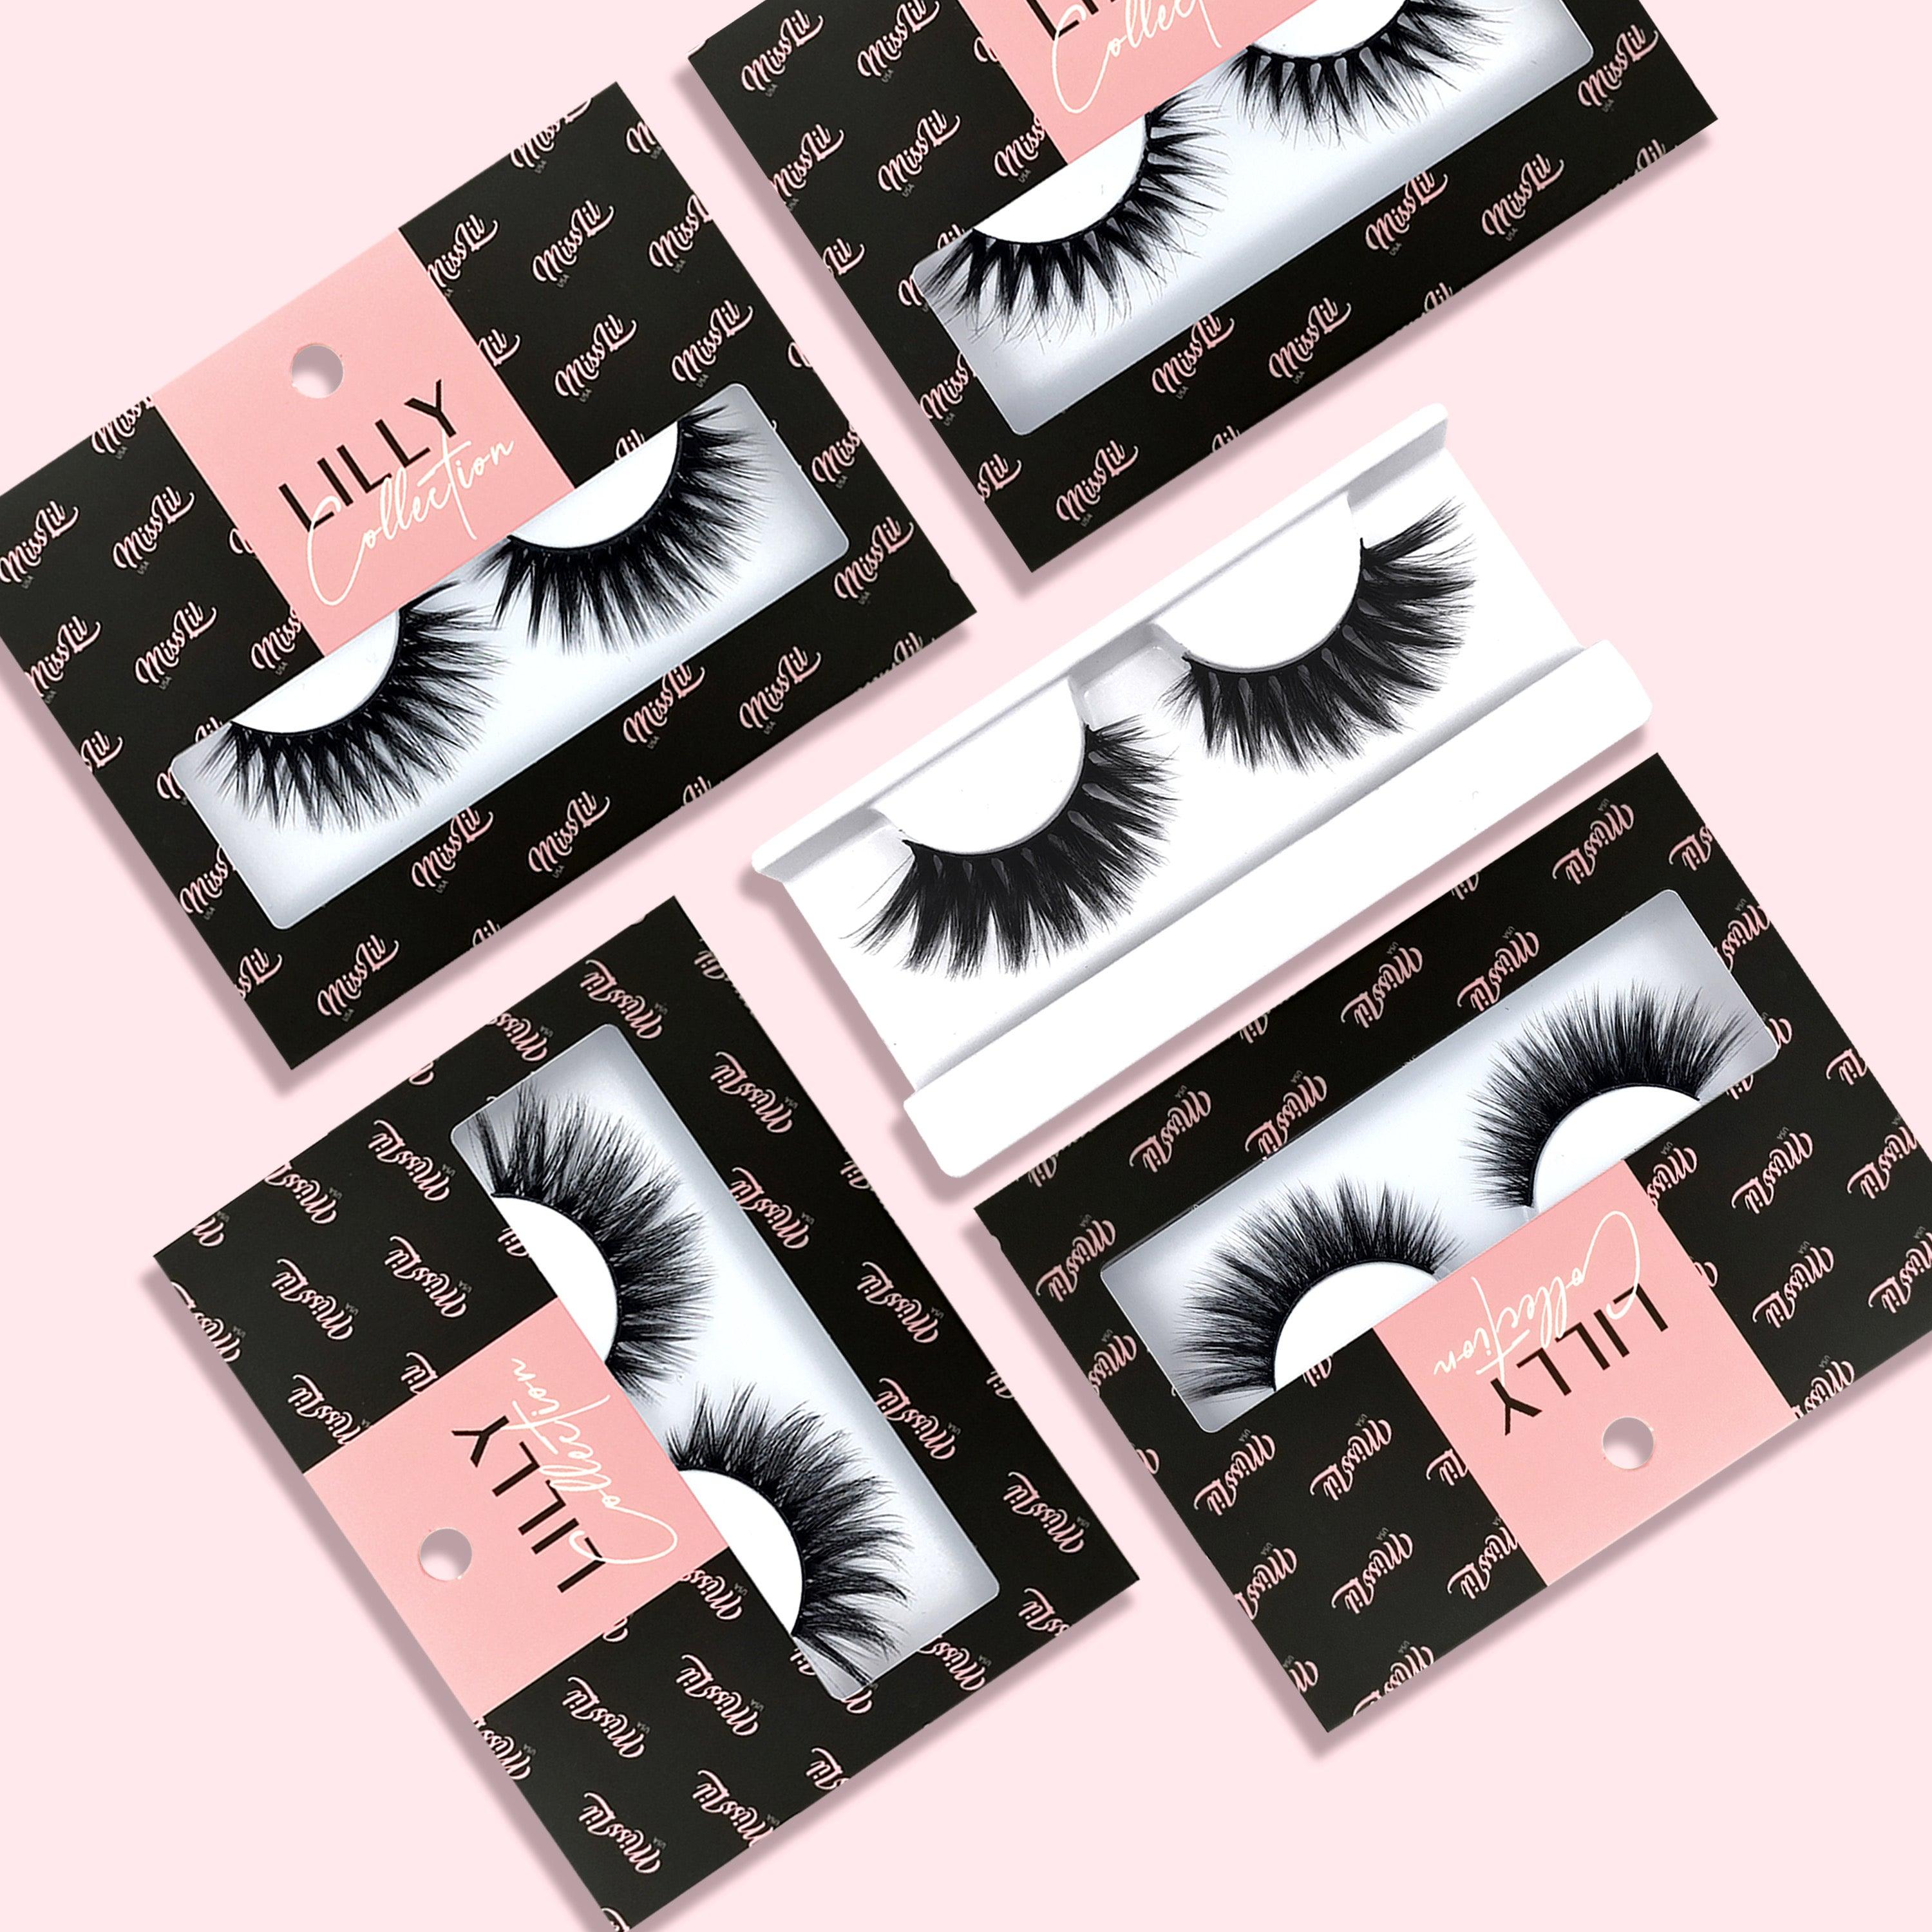 Lilly Collection Eyelashes (144 pcs) (12 stills) - Miss Lil USA